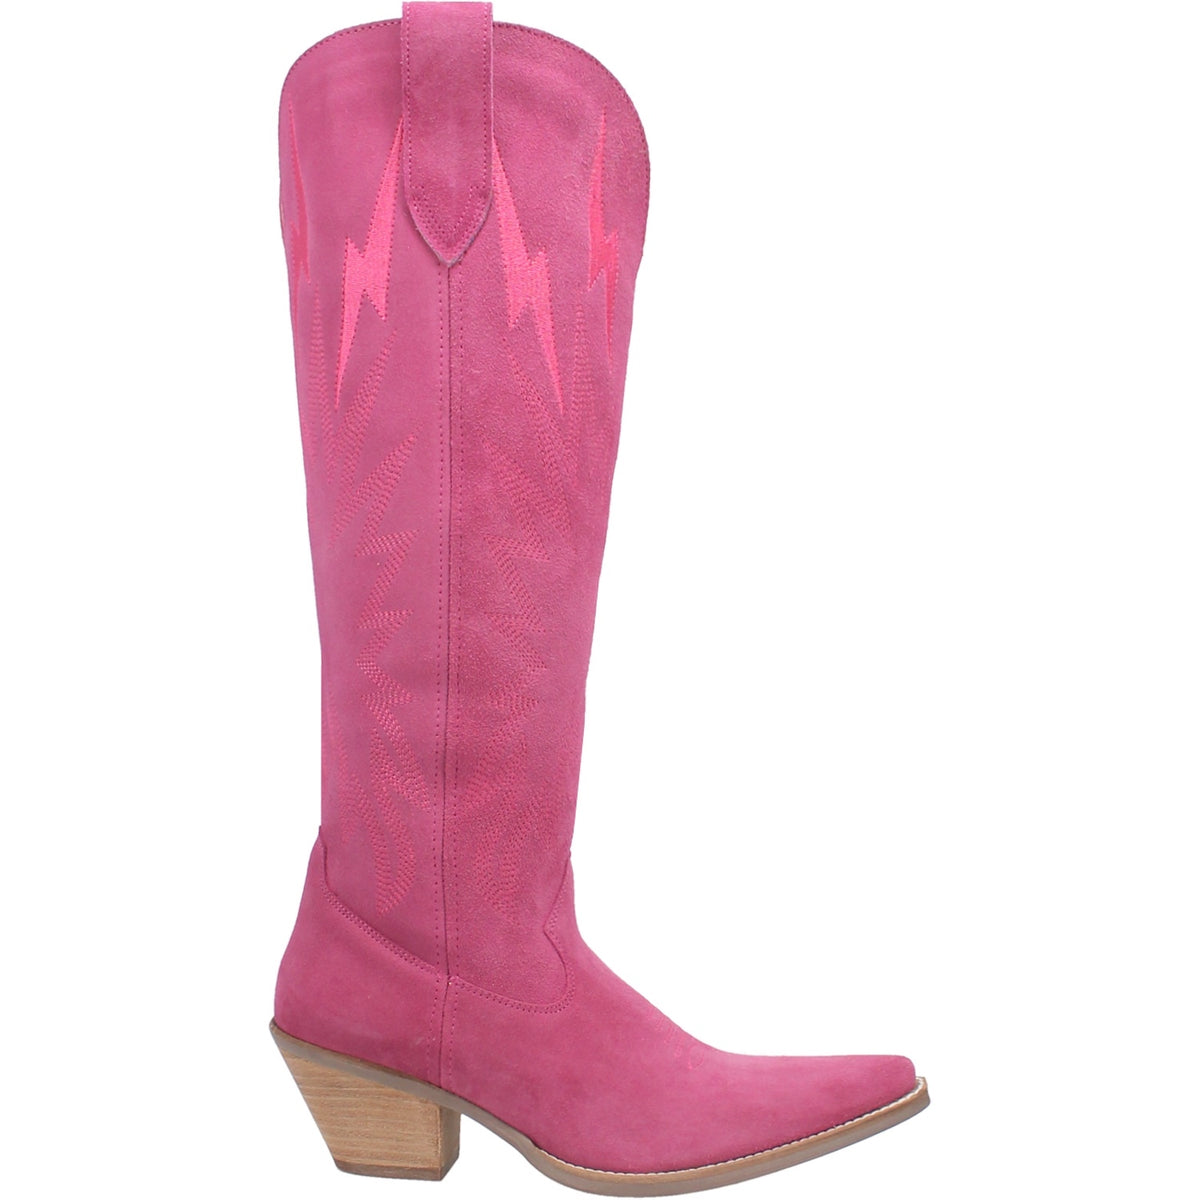 Thunder Road Leather Boot in Fuchsia